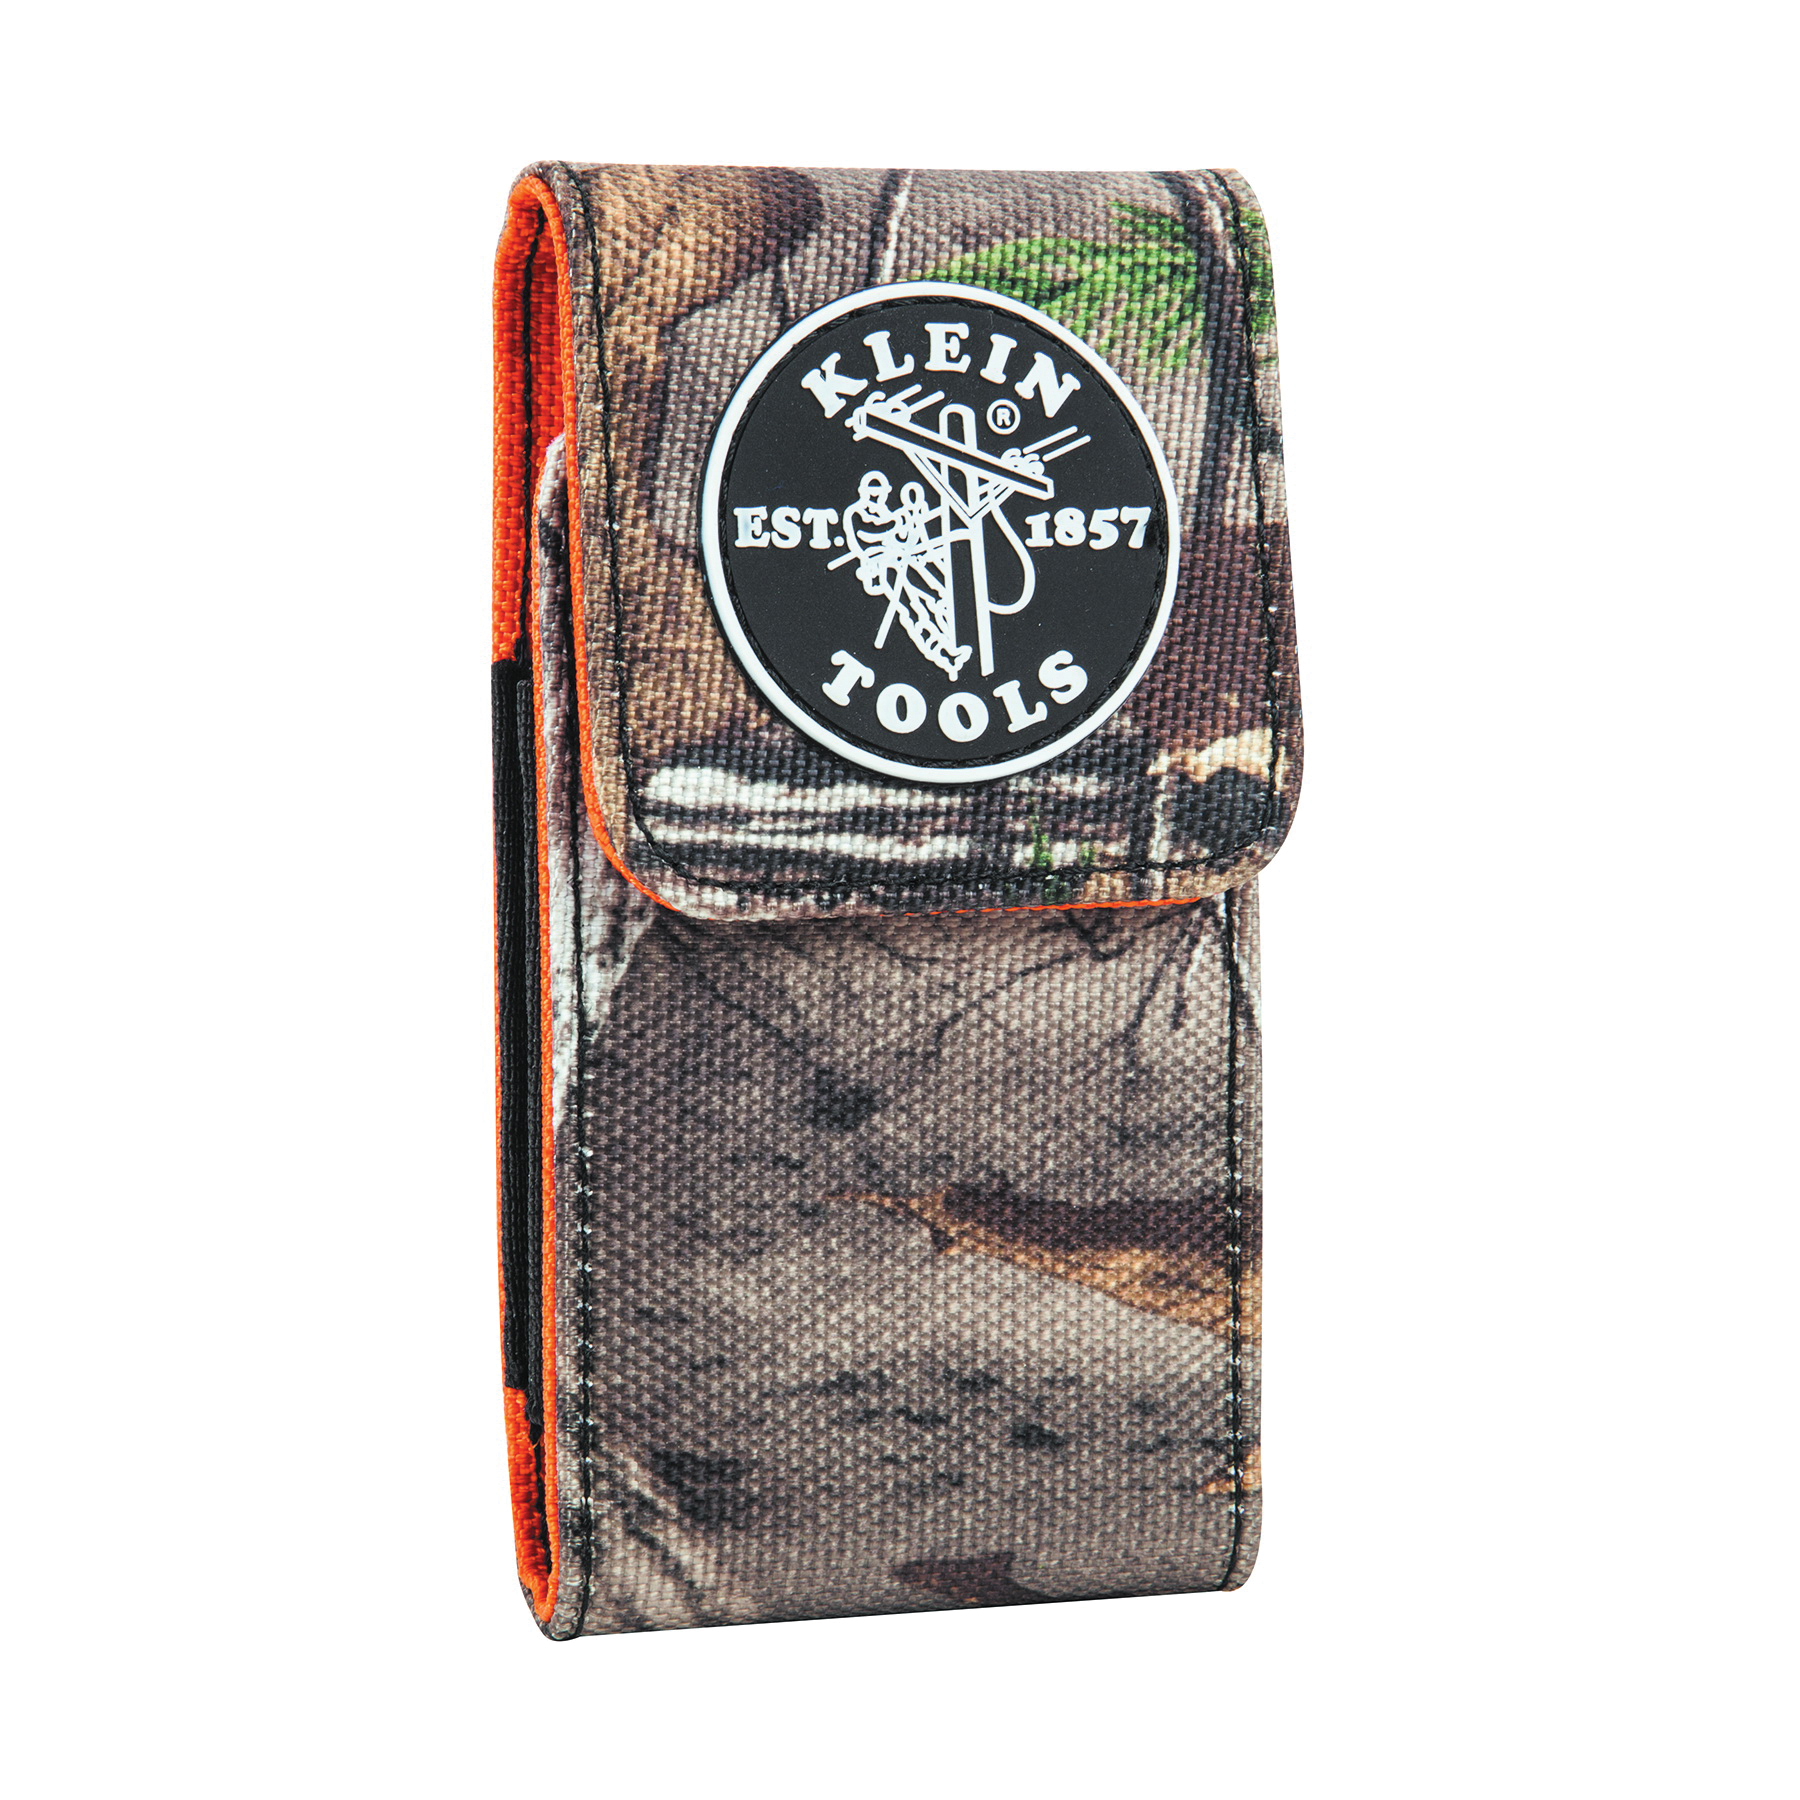 Klein® Tradesman Pro 55563 Phone Holder, 3-19/64 in L, 1-1/2 in W, 6 in H, 1680D Ballistic Weave Polyester, Camouflage